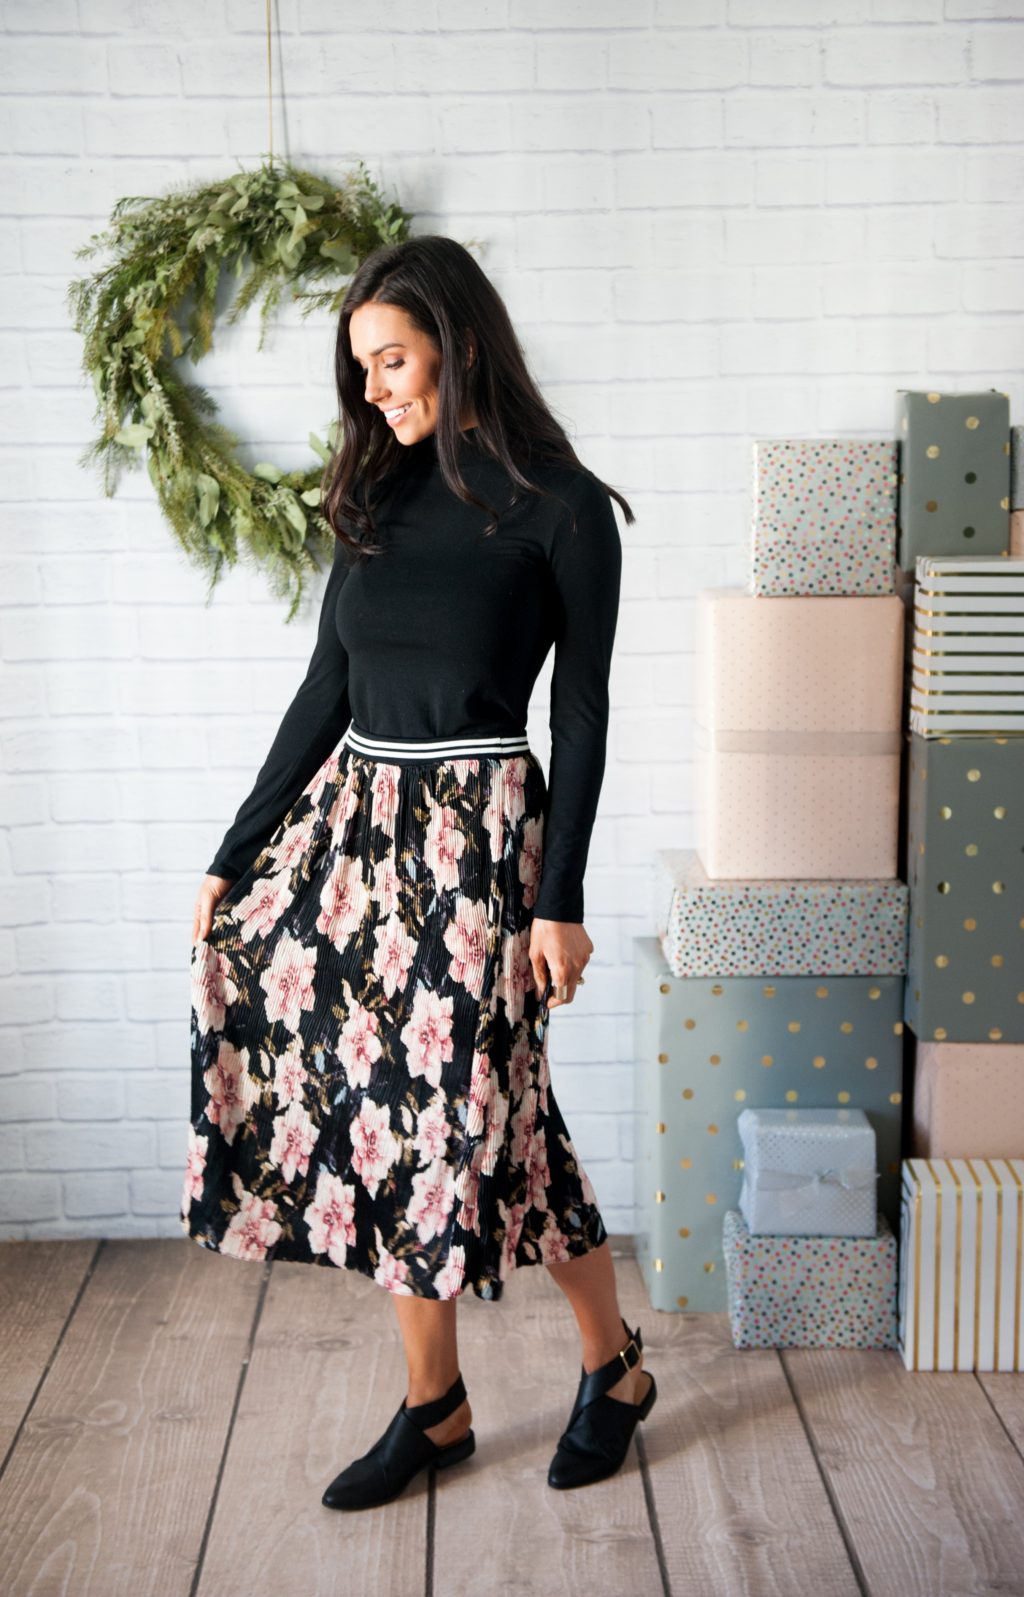 Midi-Skirt-And-Turtleneck.-2-1024x1597 65+ Smartest Business Casual Attire for Women in 2022